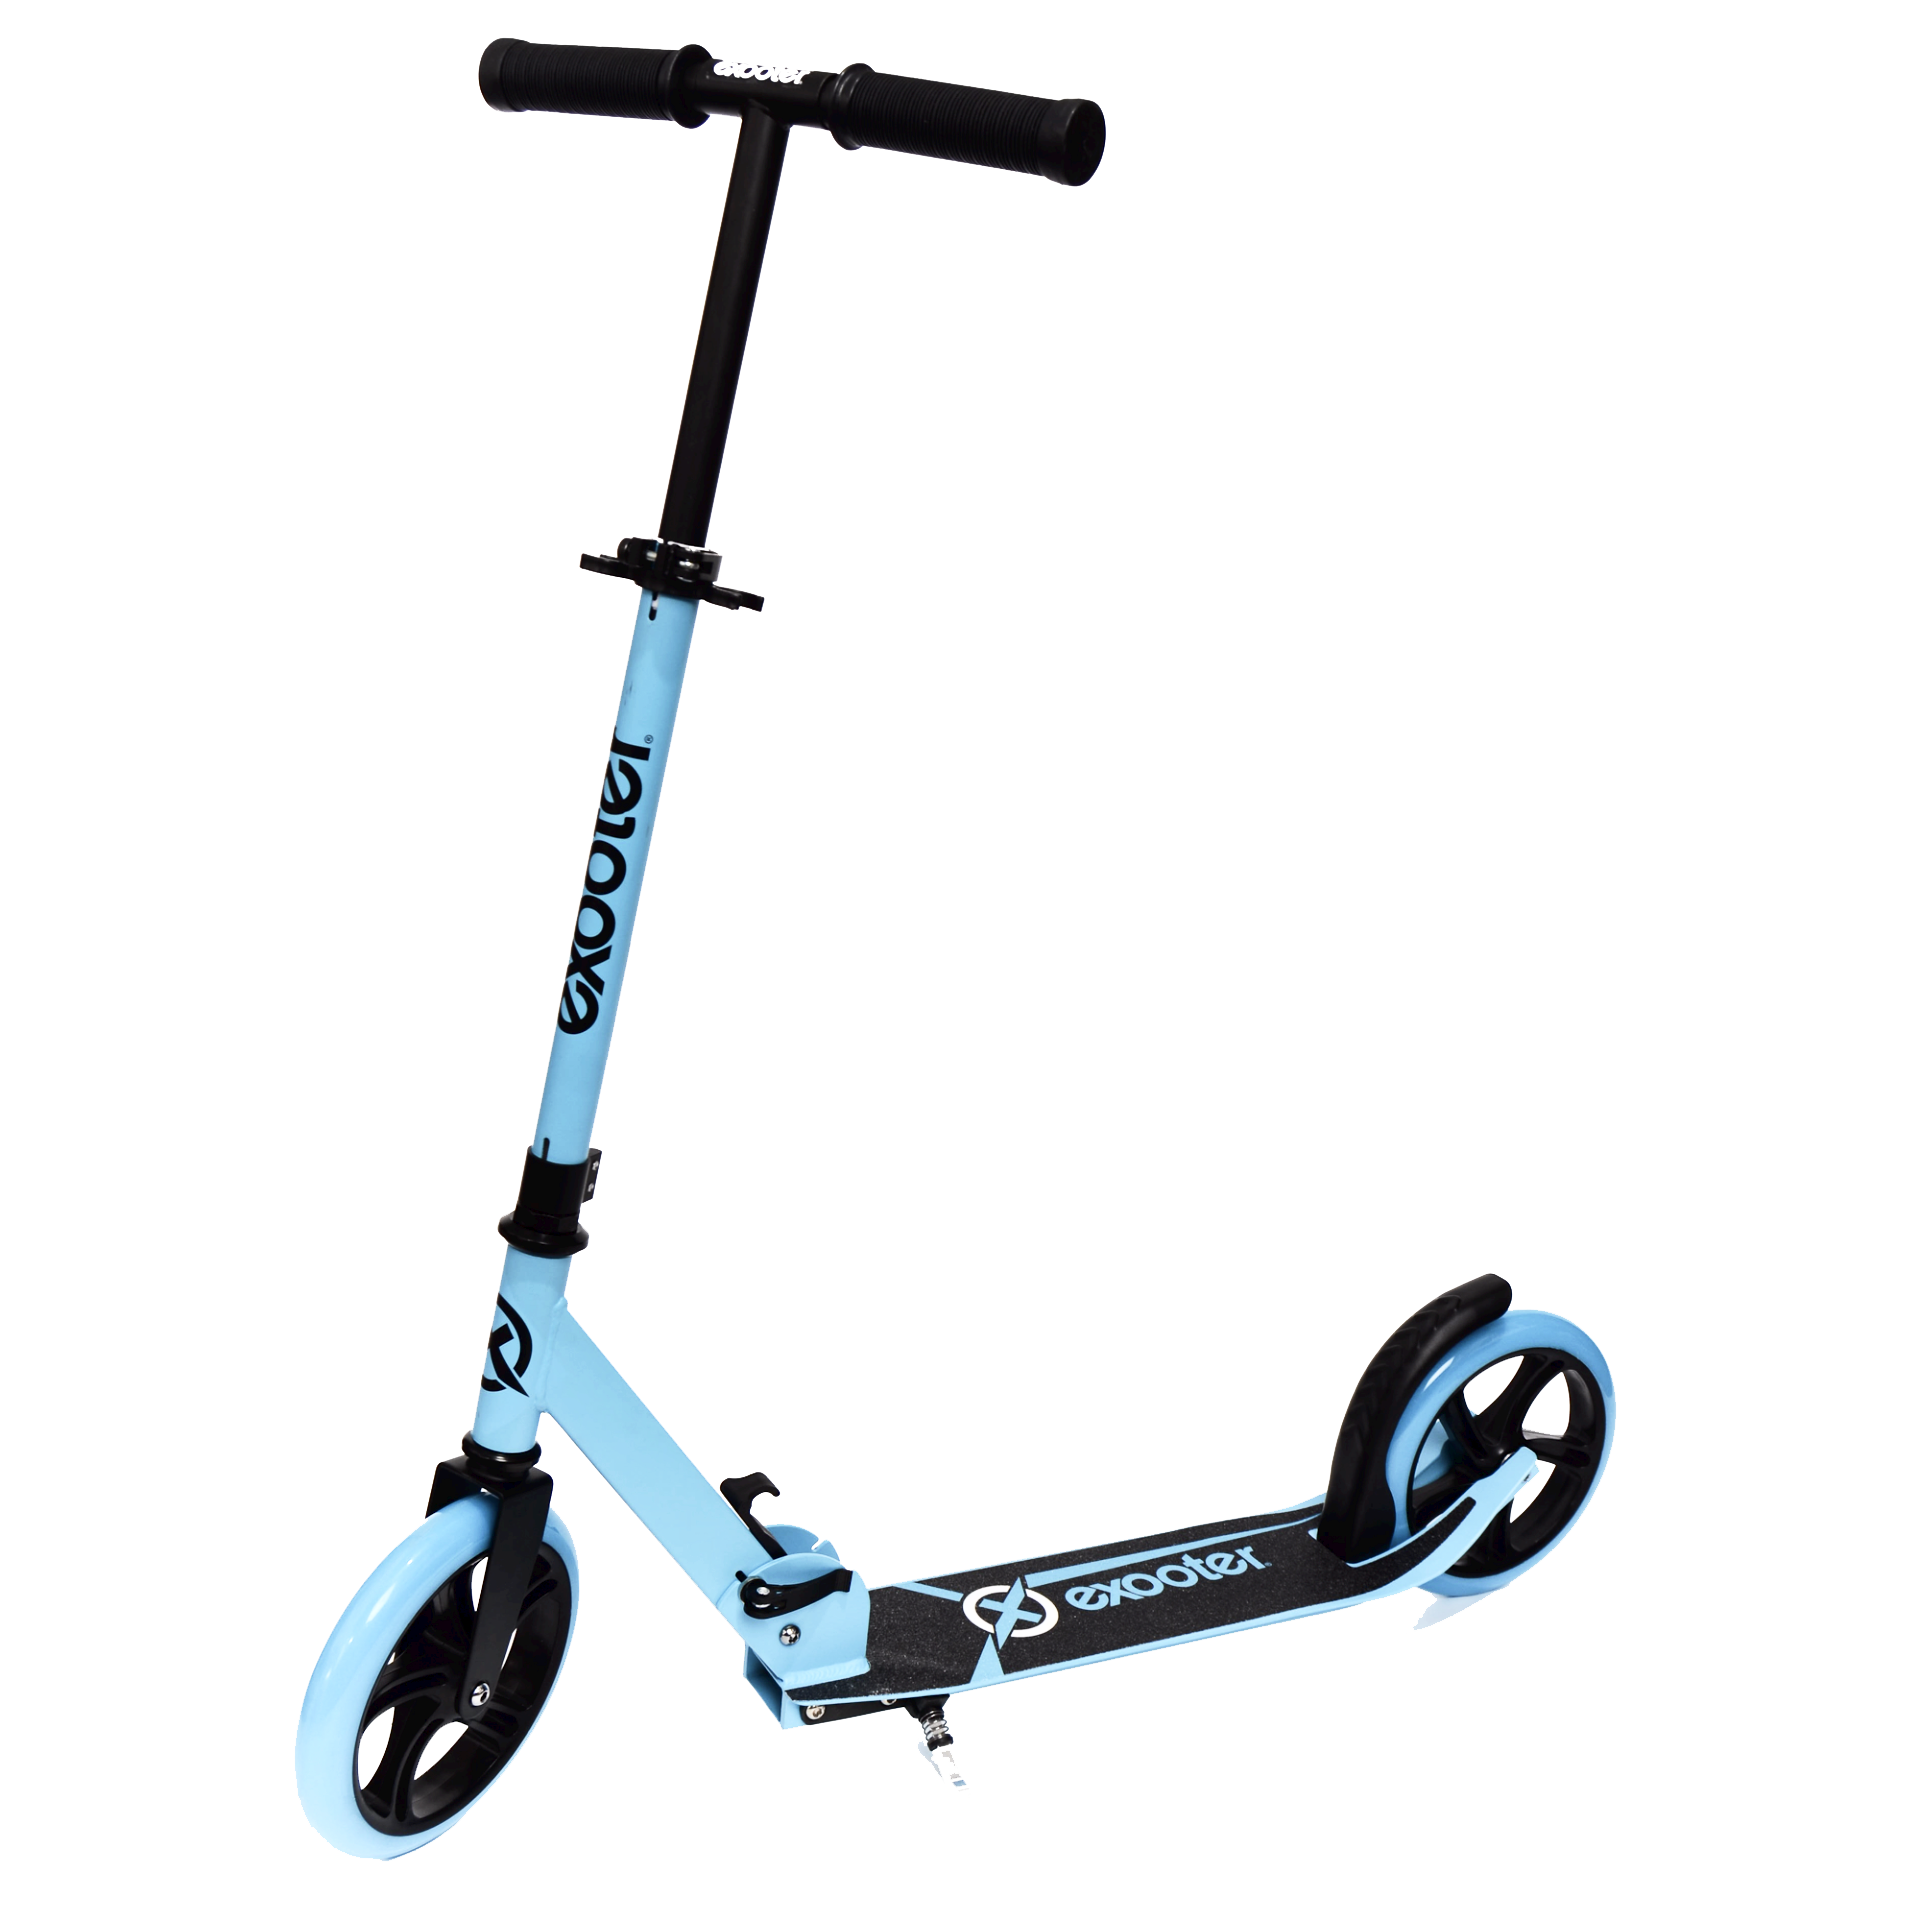 Scooter PNG HD Images